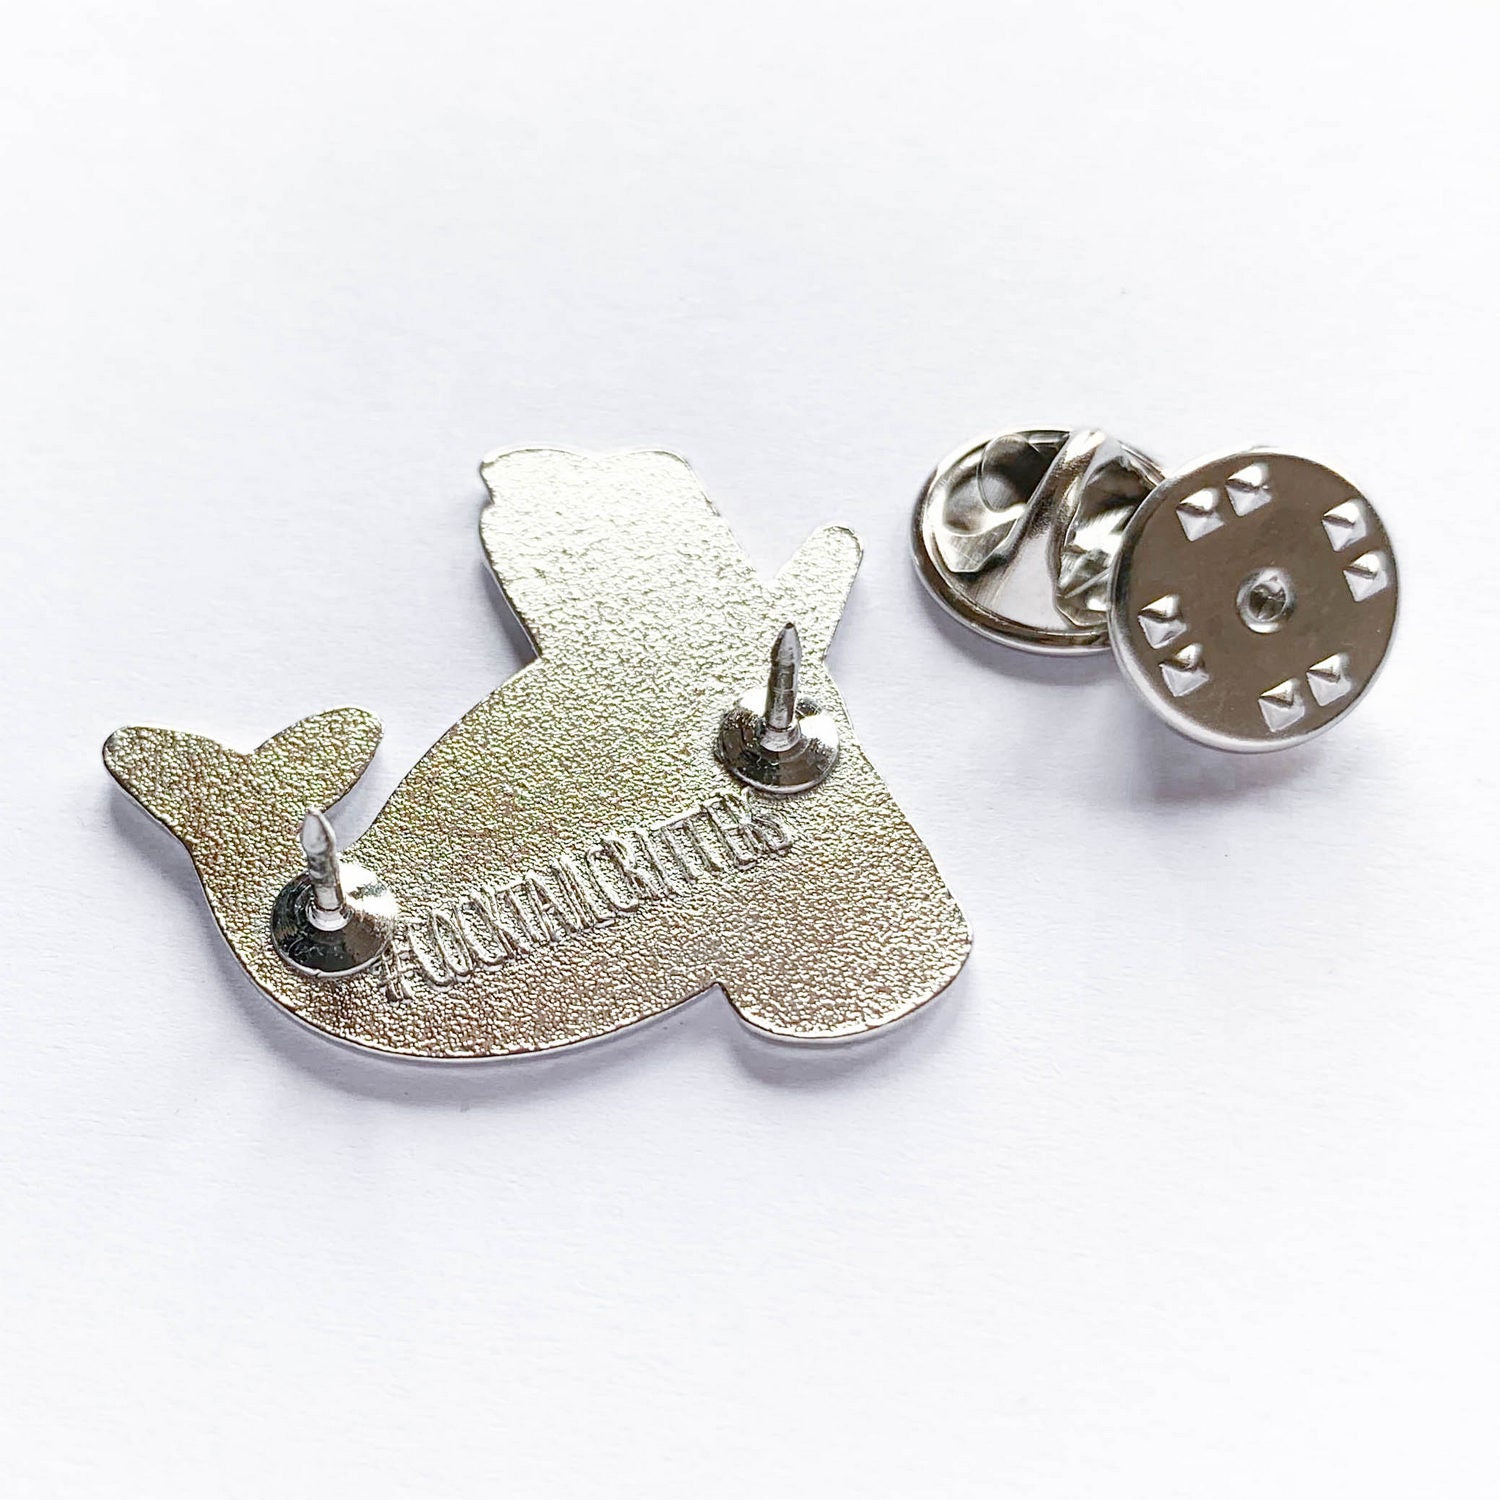 Narwhal & Paloma Cocktail Hard Enamel Pin by Cocktail Critters